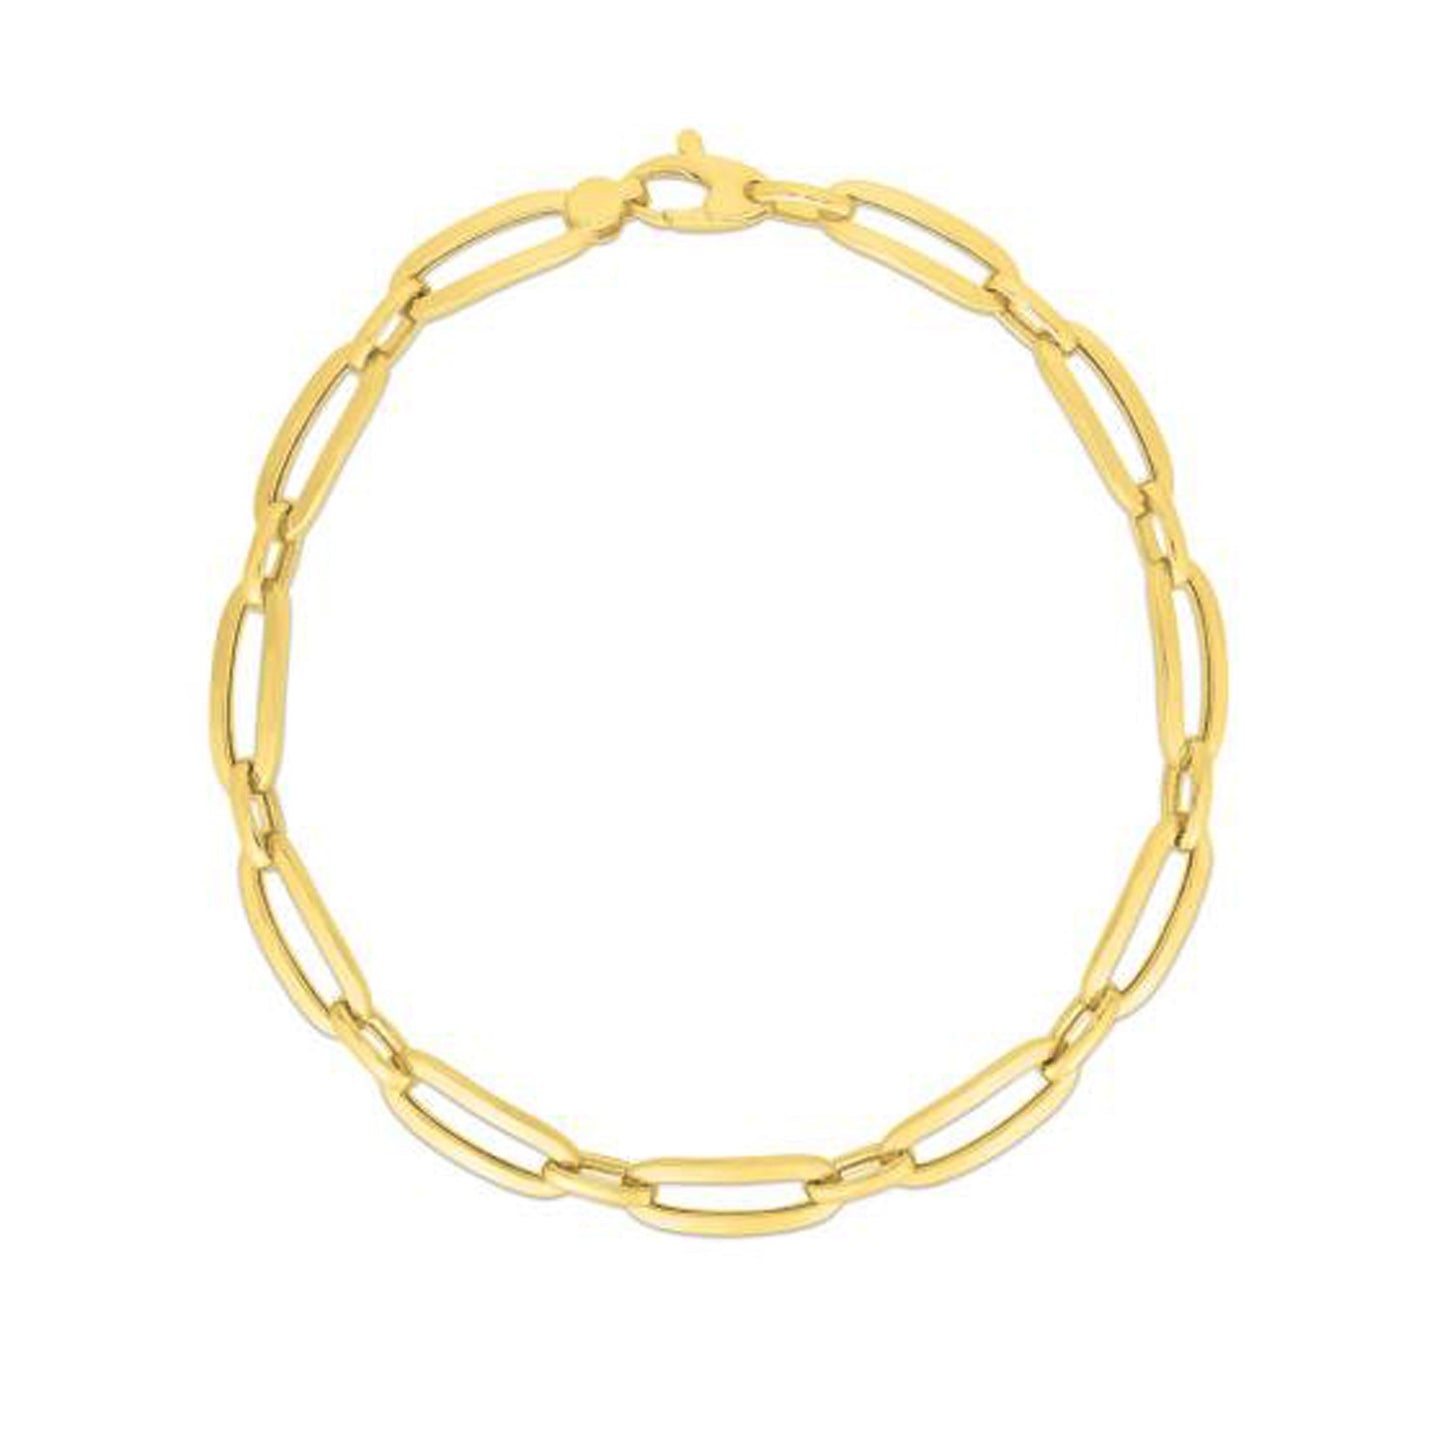 14k Yellow Gold 7 1/4 inch Bombay Paperclip Chain Bracelet